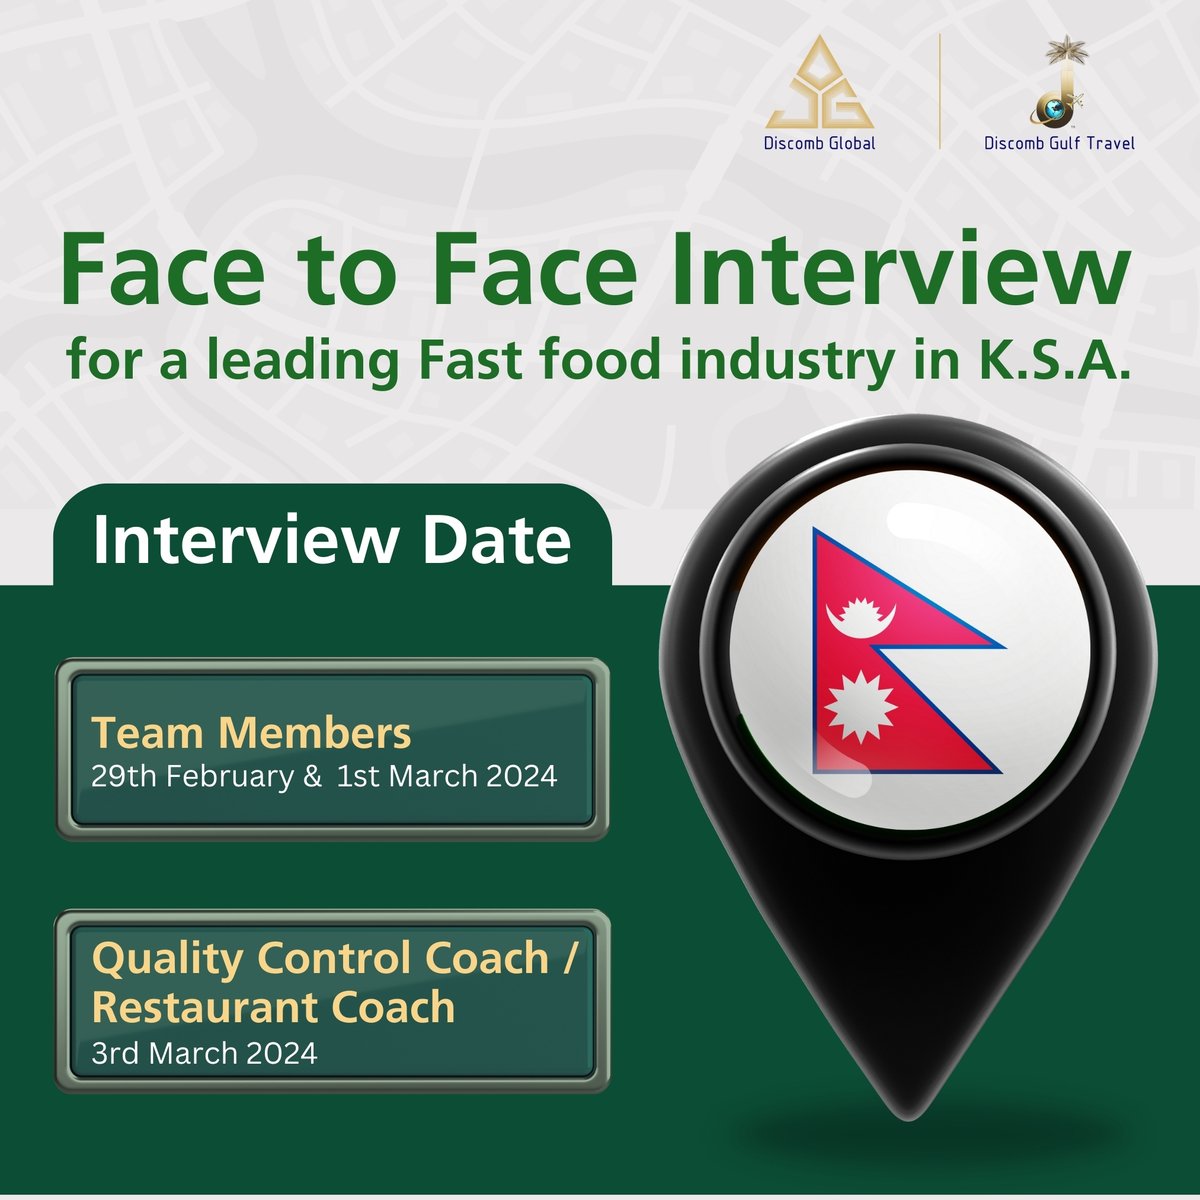 Face to Face Interview for a leading Fast food industry in K.S.A.

#qualitycontrolcoach #restaurantcoach
#teammembers #fastfoodindustry #jobsingulf #jobsinsaudiarabia #jobsforqcc #qcc #rc #discombglobal #discombgulftravels